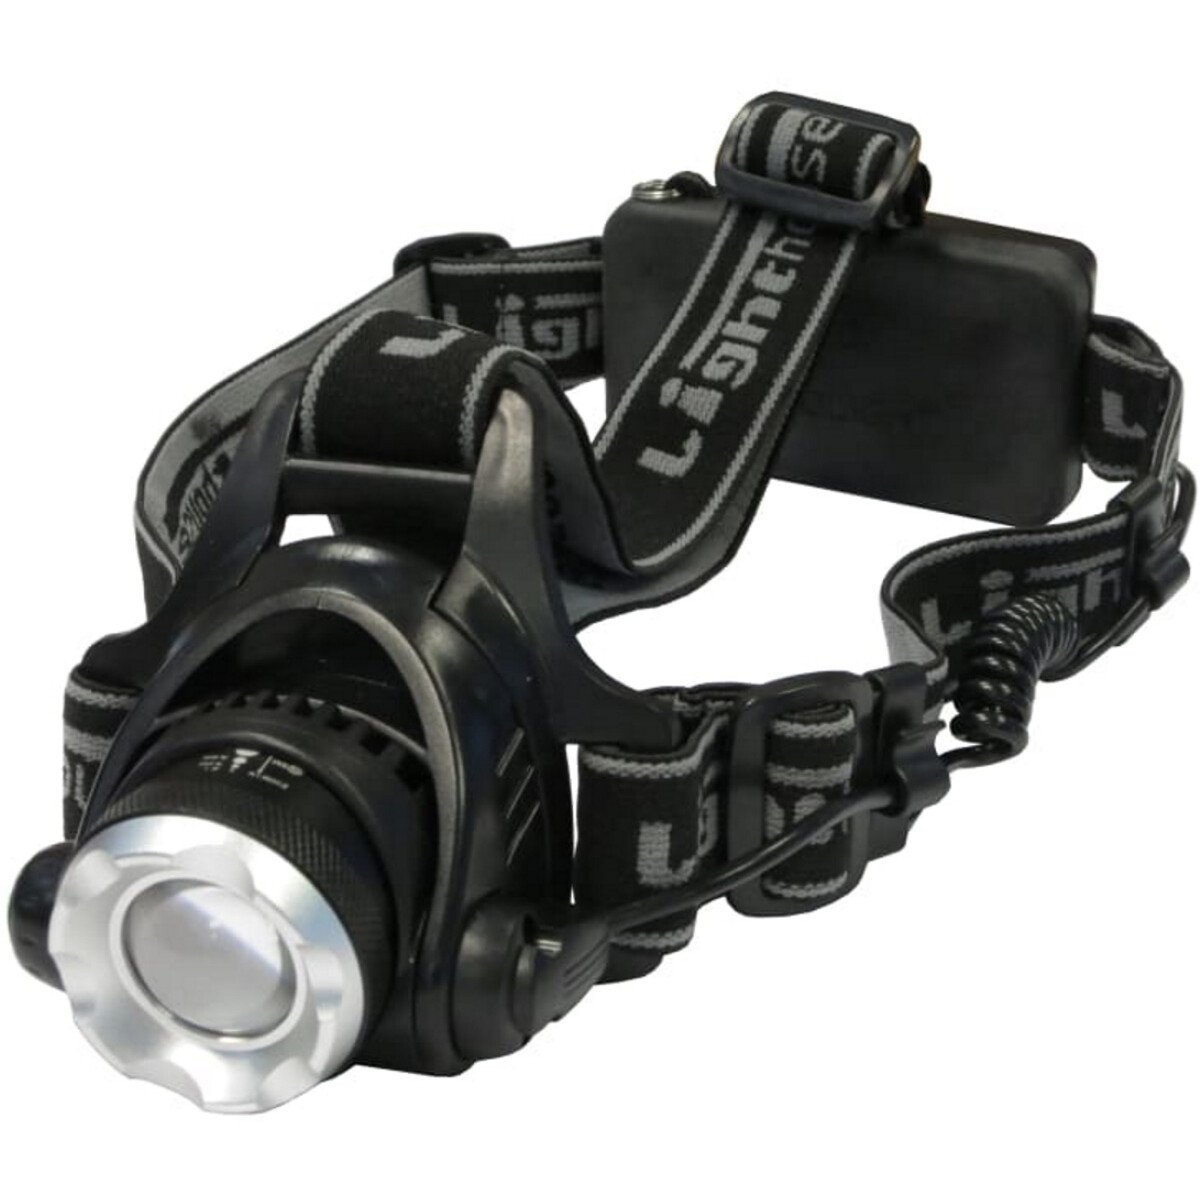 Lighthouse HL-H0505-1 LED Wide Beam Rechargeable Headlight 120 lumens L/HEHEAD350R